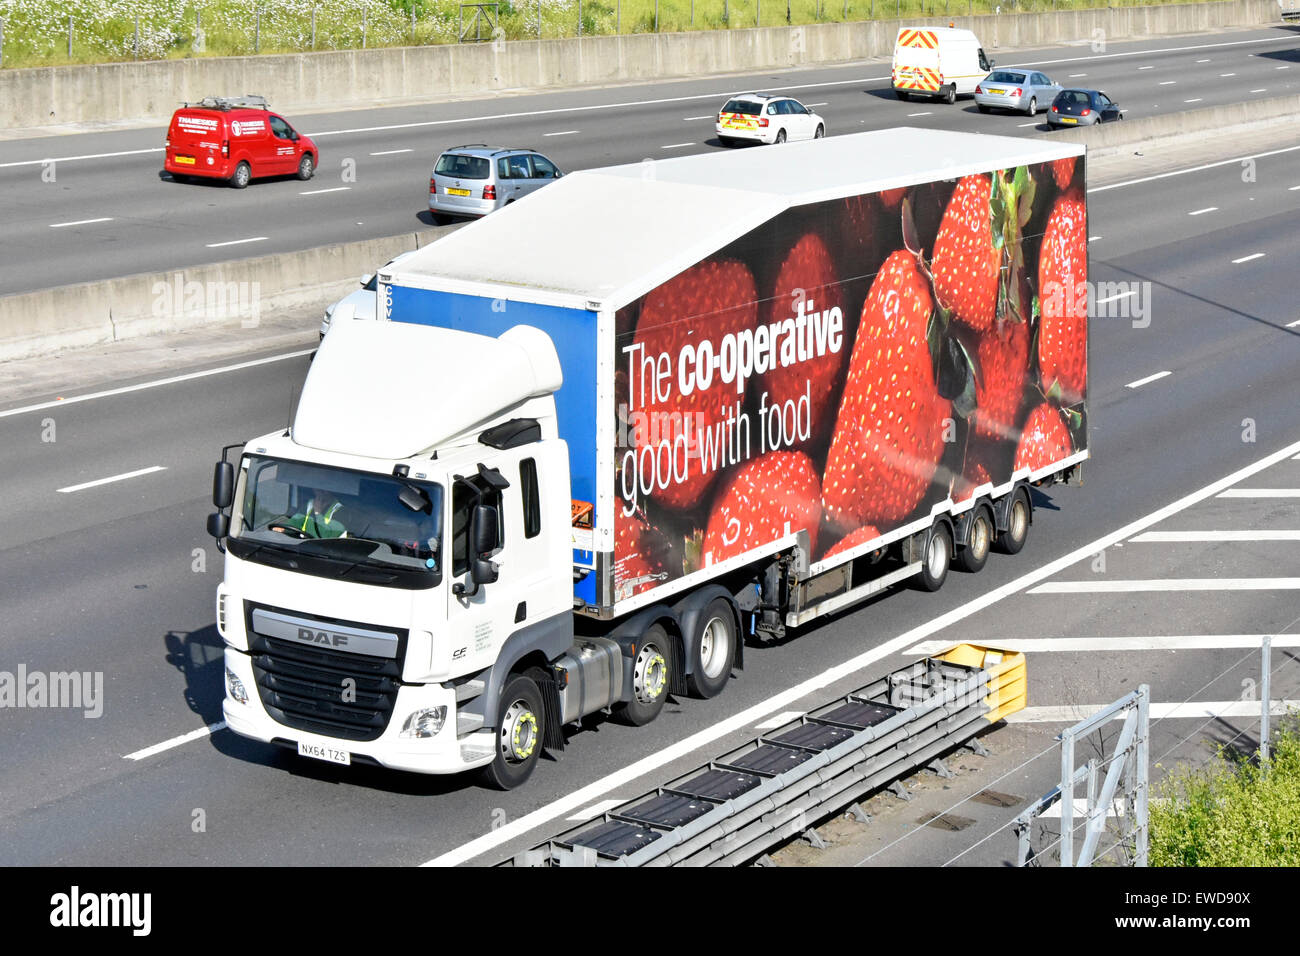 Co op supermarket food store supply chain delivery hgv truck lorry & articulated trailer strawberries graphics driving along motorway England UK Stock Photo